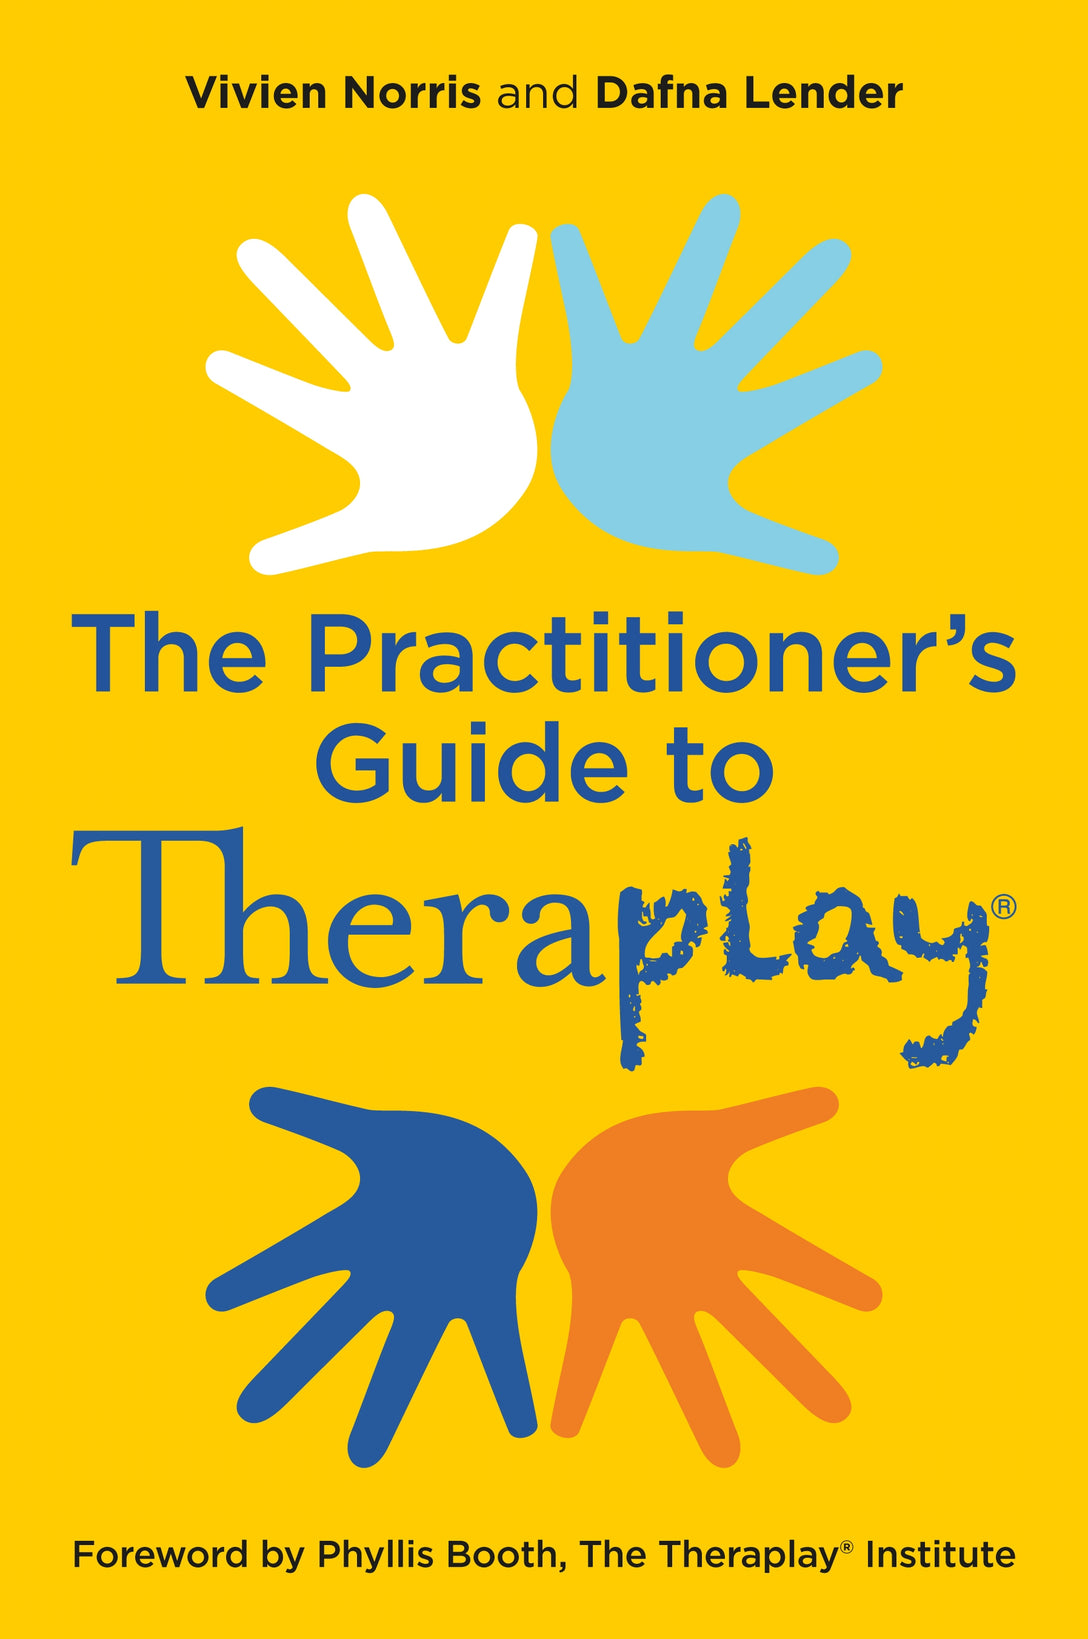 Theraplay® – The Practitioner's Guide by Vivien Norris, Phyllis Booth, Dafna Lender